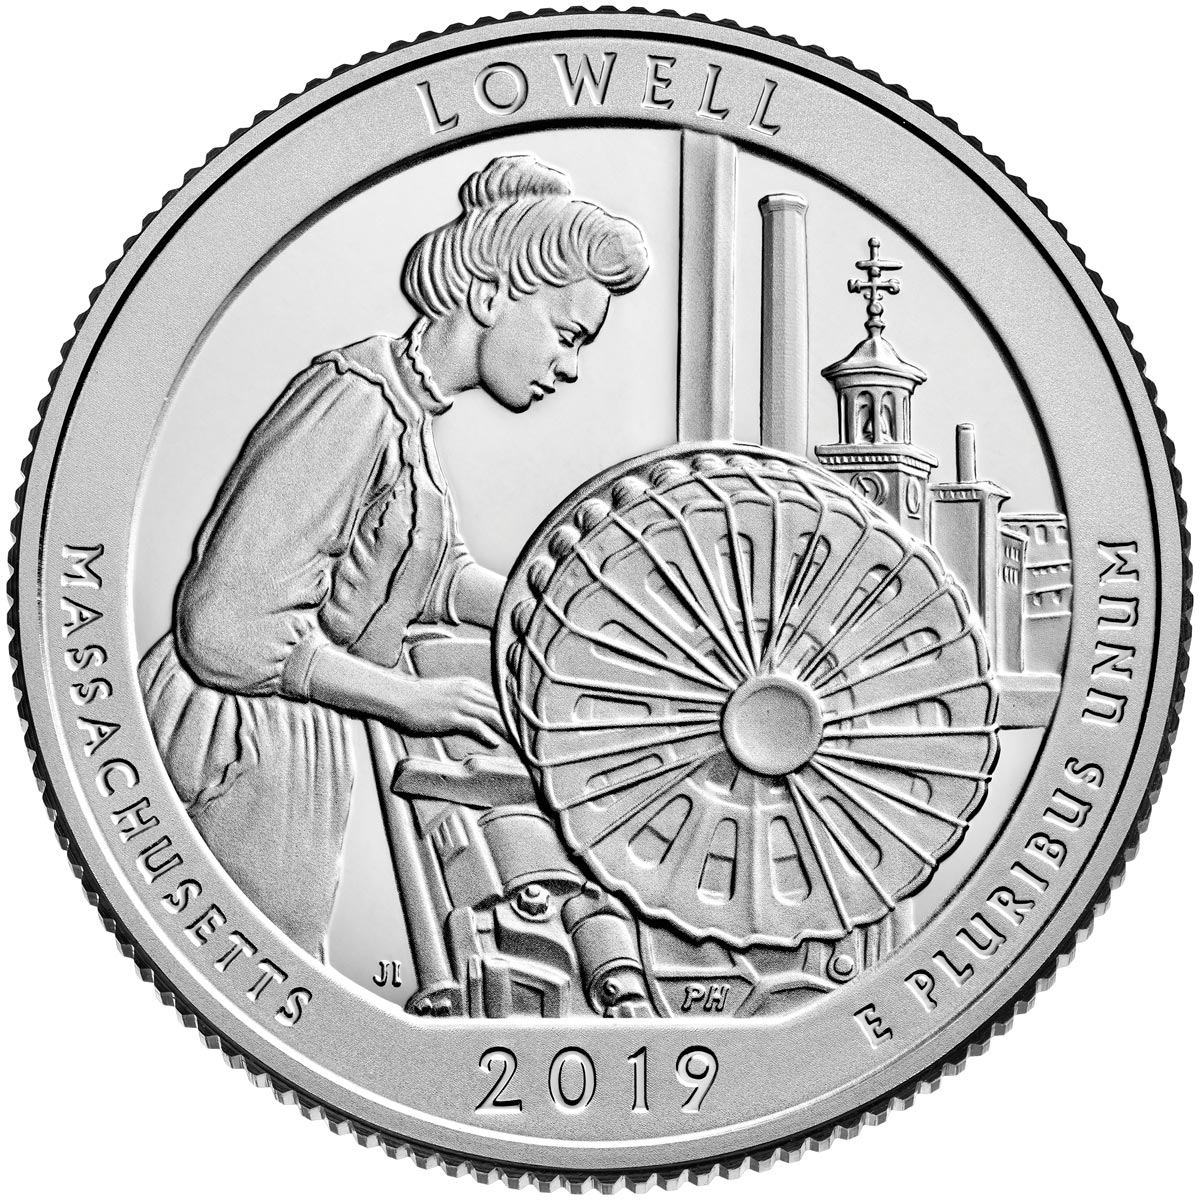 Image of 25 cents coin - Lowell National Historical Park | USA 2019.  The Copper–Nickel (CuNi) coin is of Proof, BU, UNC quality.